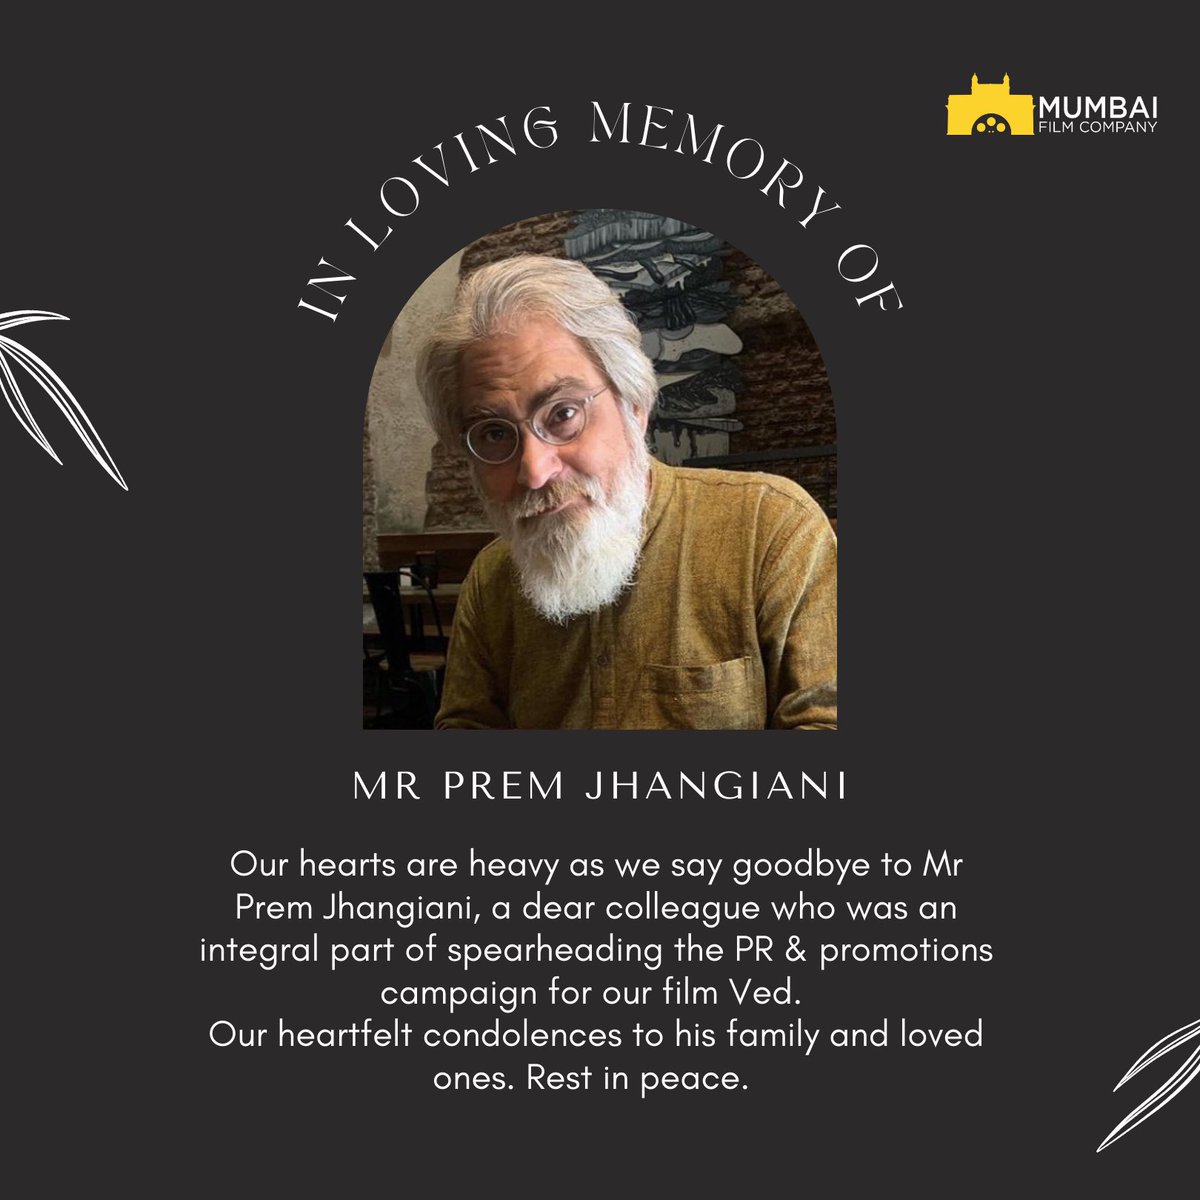 Our hearts are heavy as we say goodbye to Mr Prem Jhangiani, a dear colleague who was an integral part of spearheading the PR & promotions campaign for our film Ved. Our heartfelt condolences to his family and loved ones. Rest in peace sir 🙏🏻